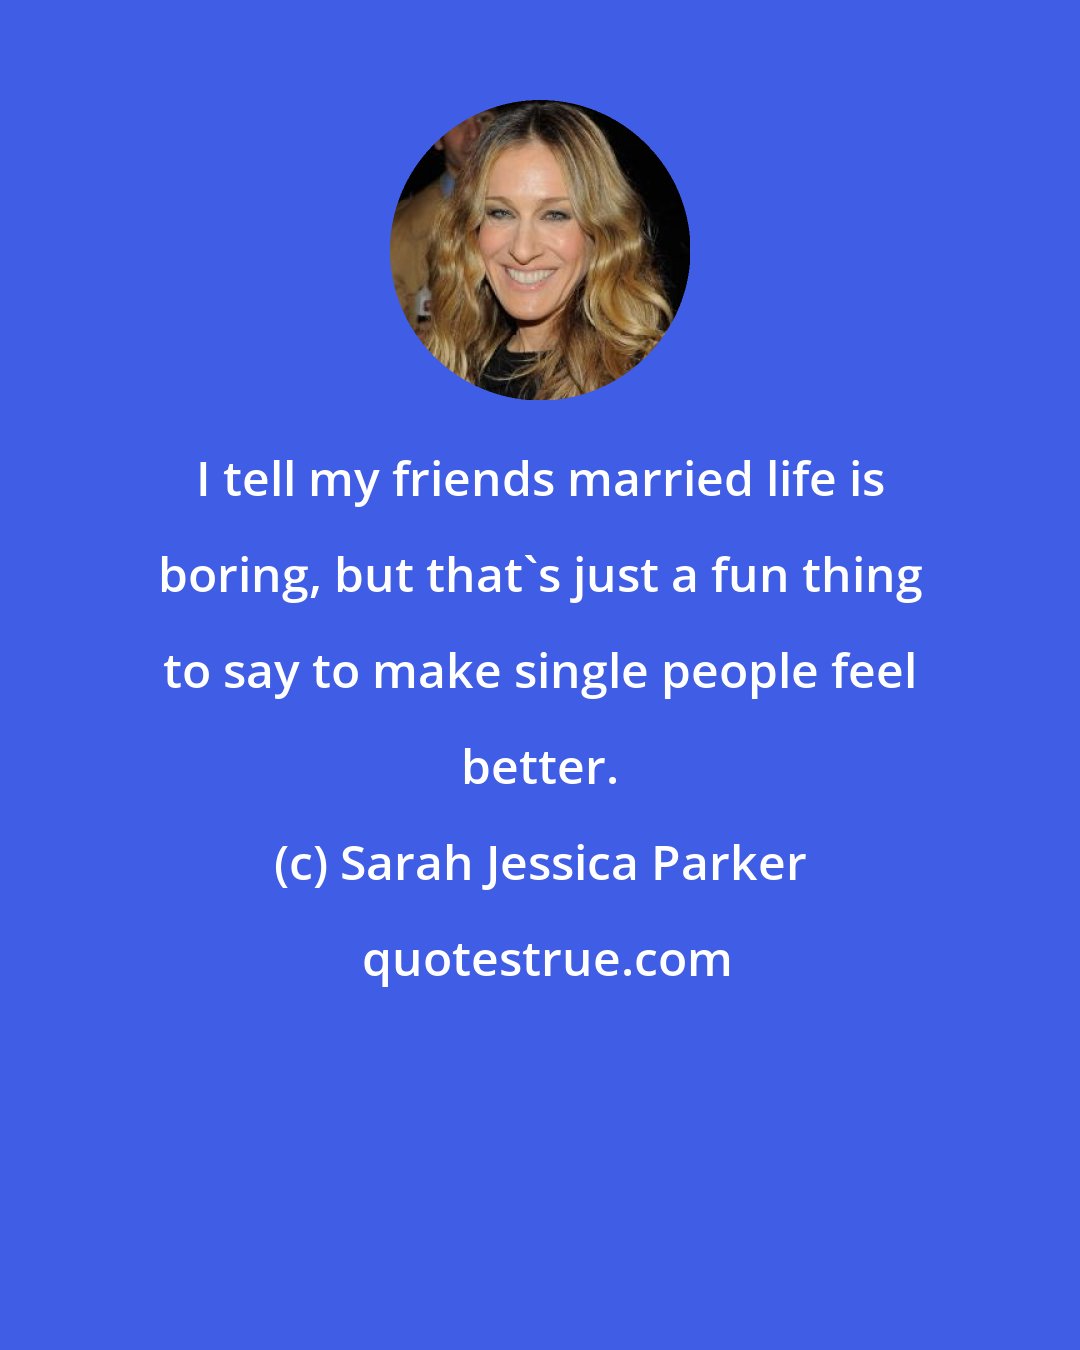 Sarah Jessica Parker: I tell my friends married life is boring, but that's just a fun thing to say to make single people feel better.